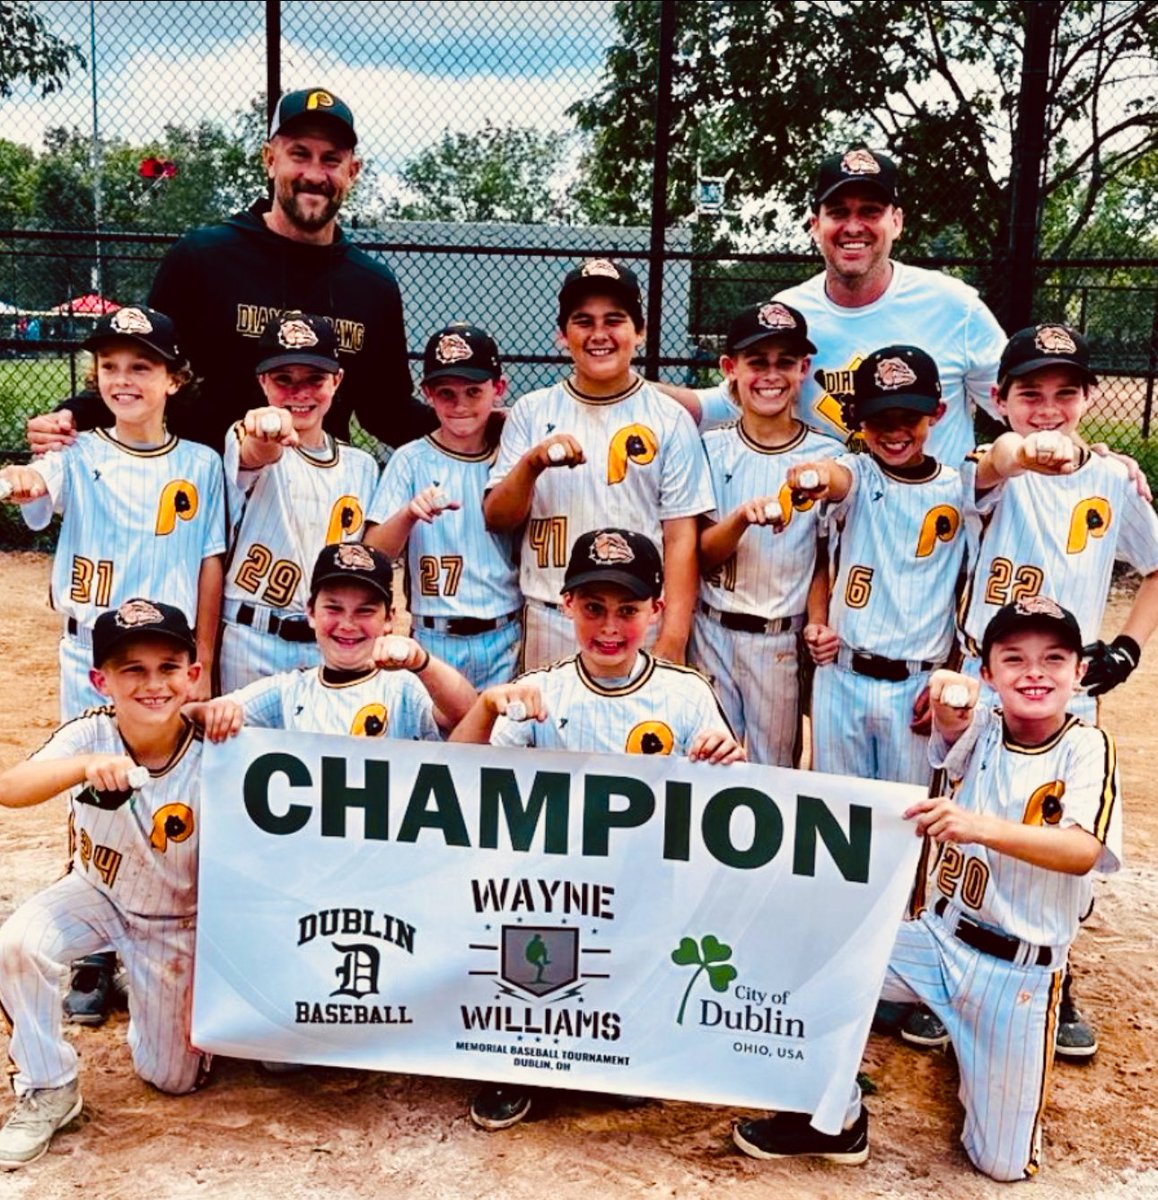 9 Gold finishes their amazing season with the Championship of the Wayne Williams Memorial Tourny in Dublin, OH. These little dudes won 5 consecutive Championships and became only the 3rd Dawgs team in 21 years to finish the season undefeated  (20-0) 🏆
#dawgsfamily #TBandBensboys